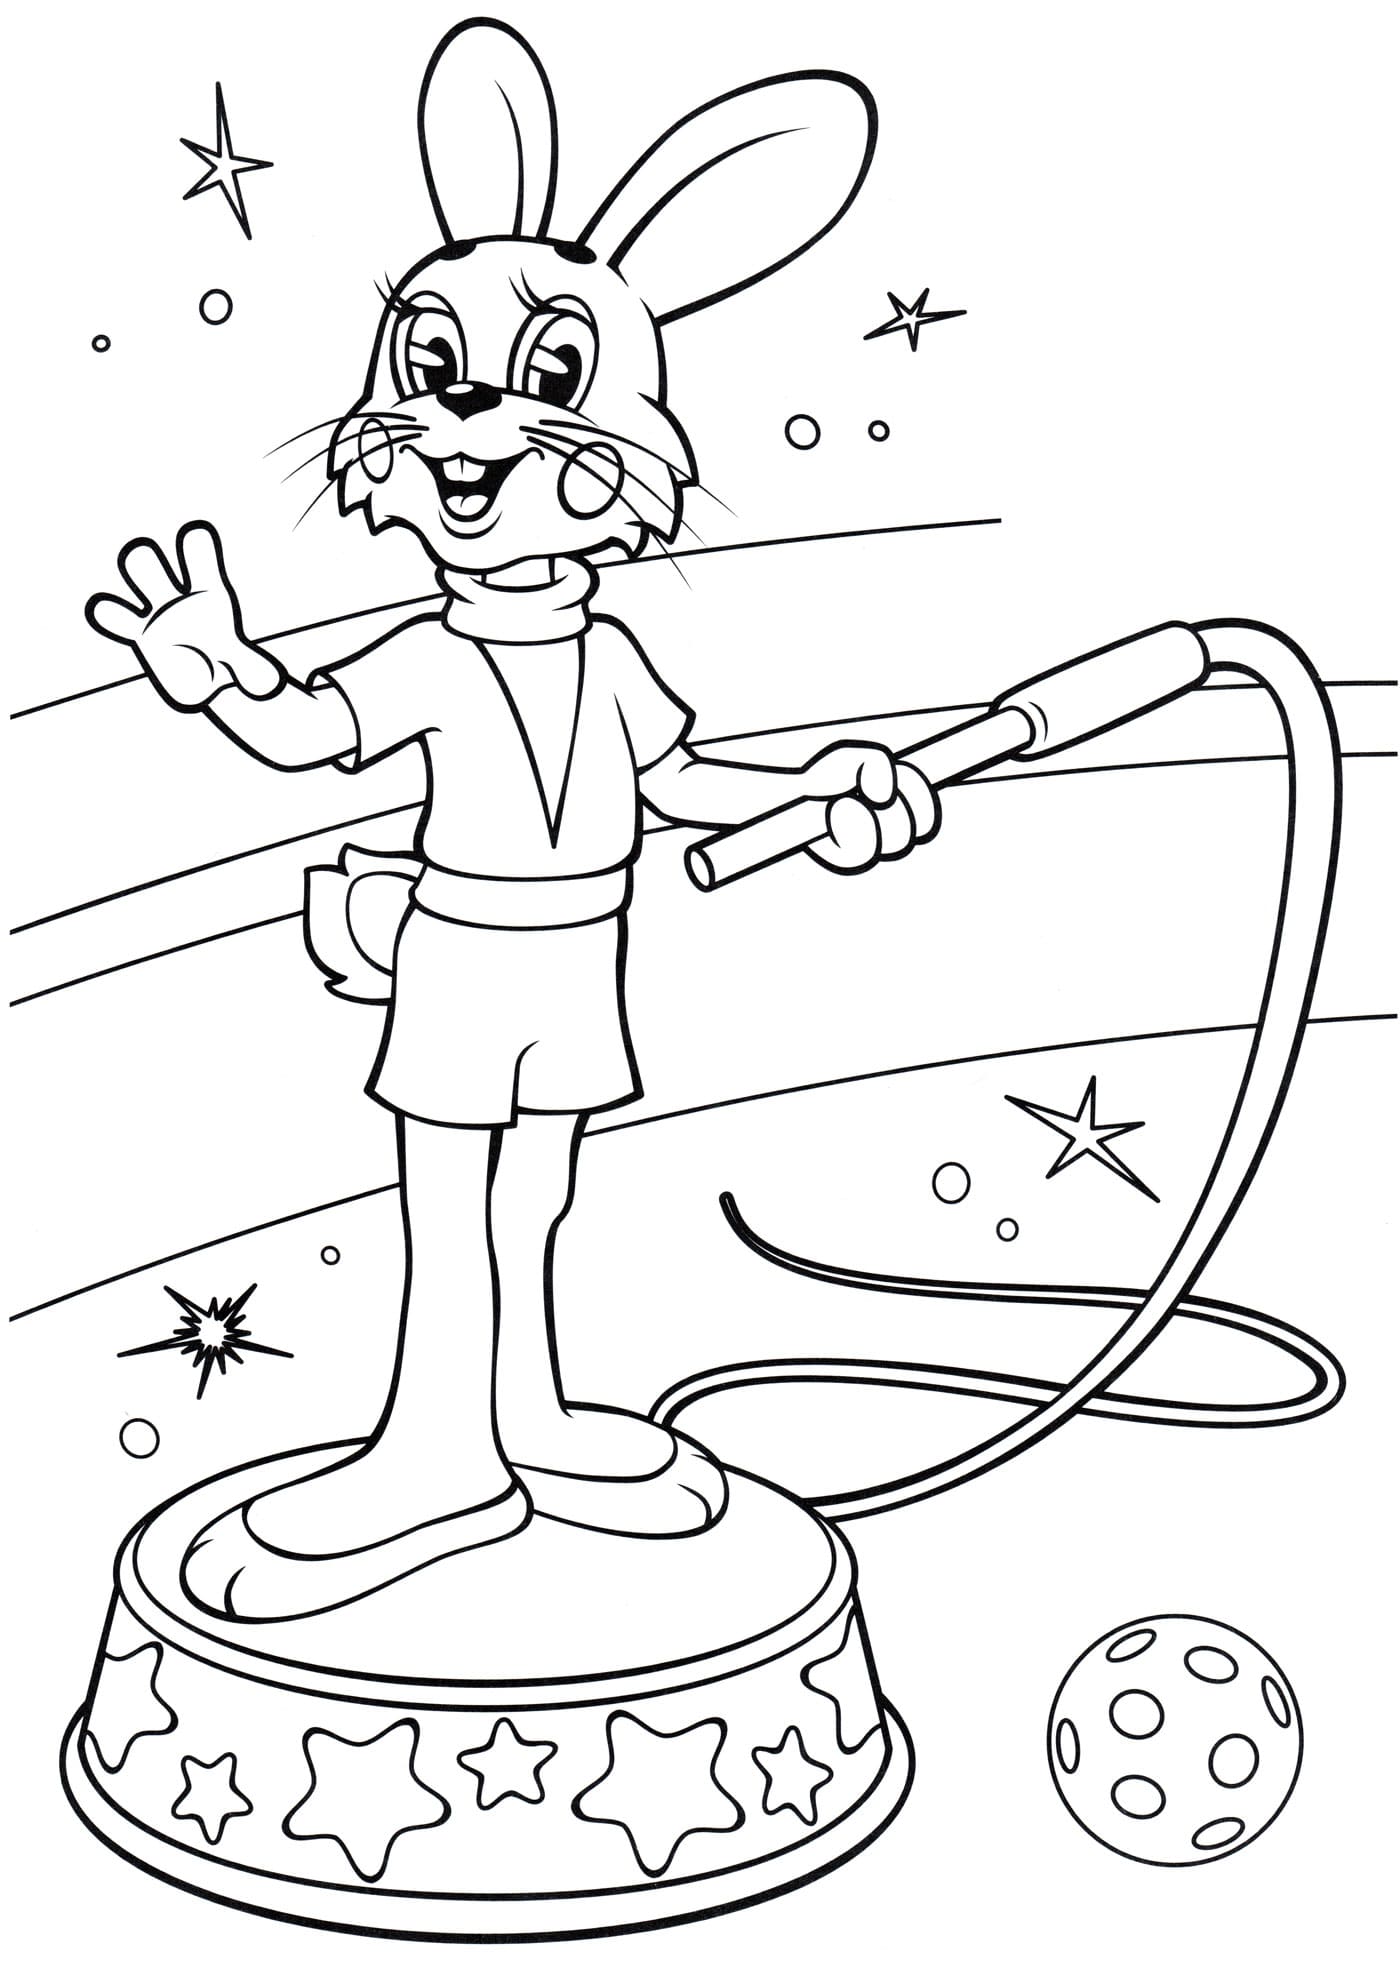 Circus Coloring Pages | 100 Pictures Free Printable